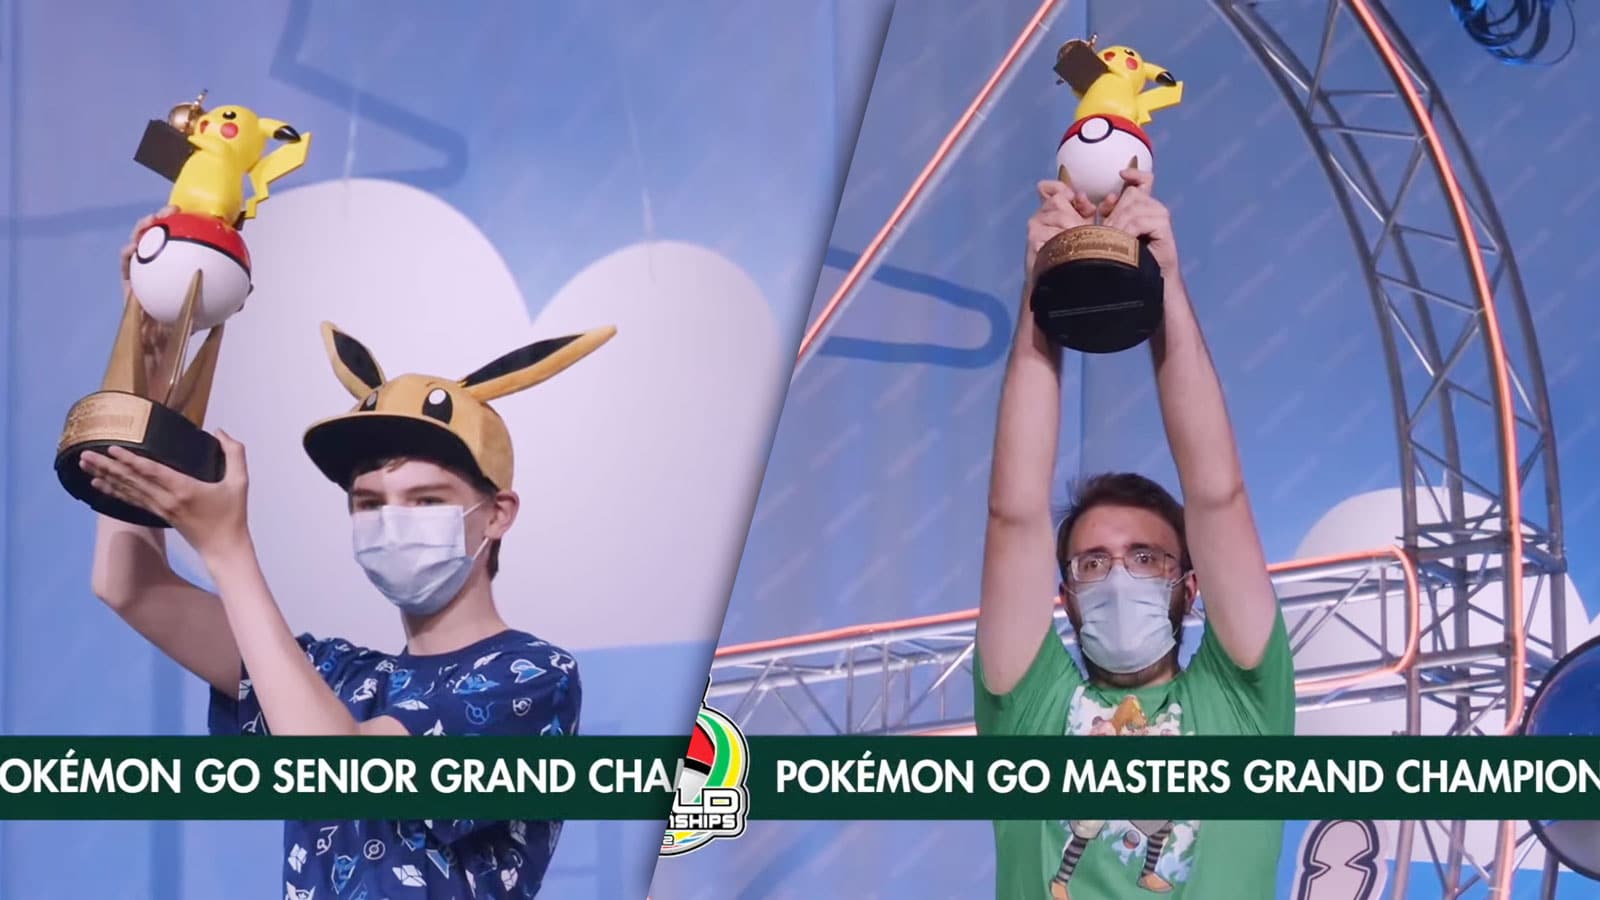 Pokémon GO Master and Senior Division Grand Champions crowned at